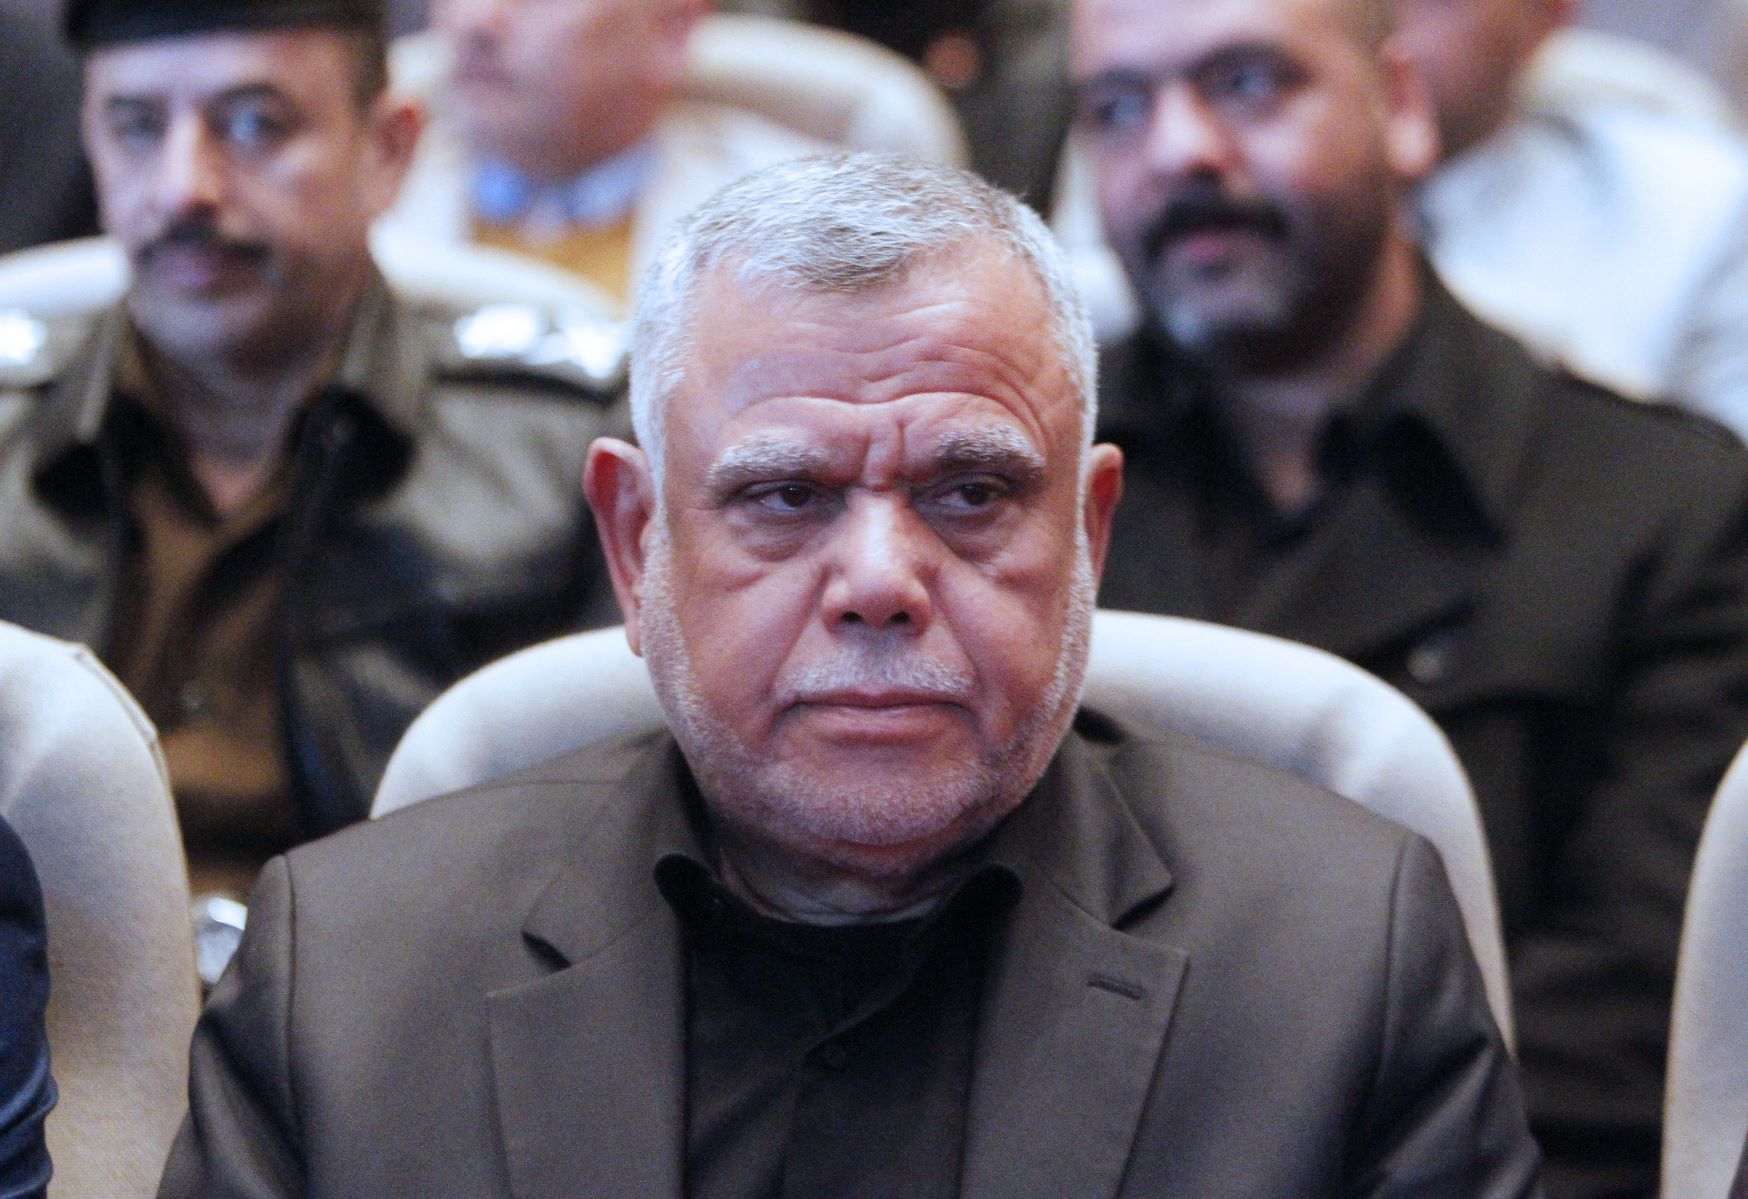 Hadi al-Ameri, head of Iraq's Badr organisation and a leader of the mostly Shiite Hashed al-Shaabi paramilitary units, attends a memorial service held in Baghdad's high-security Green Zone (AFP)